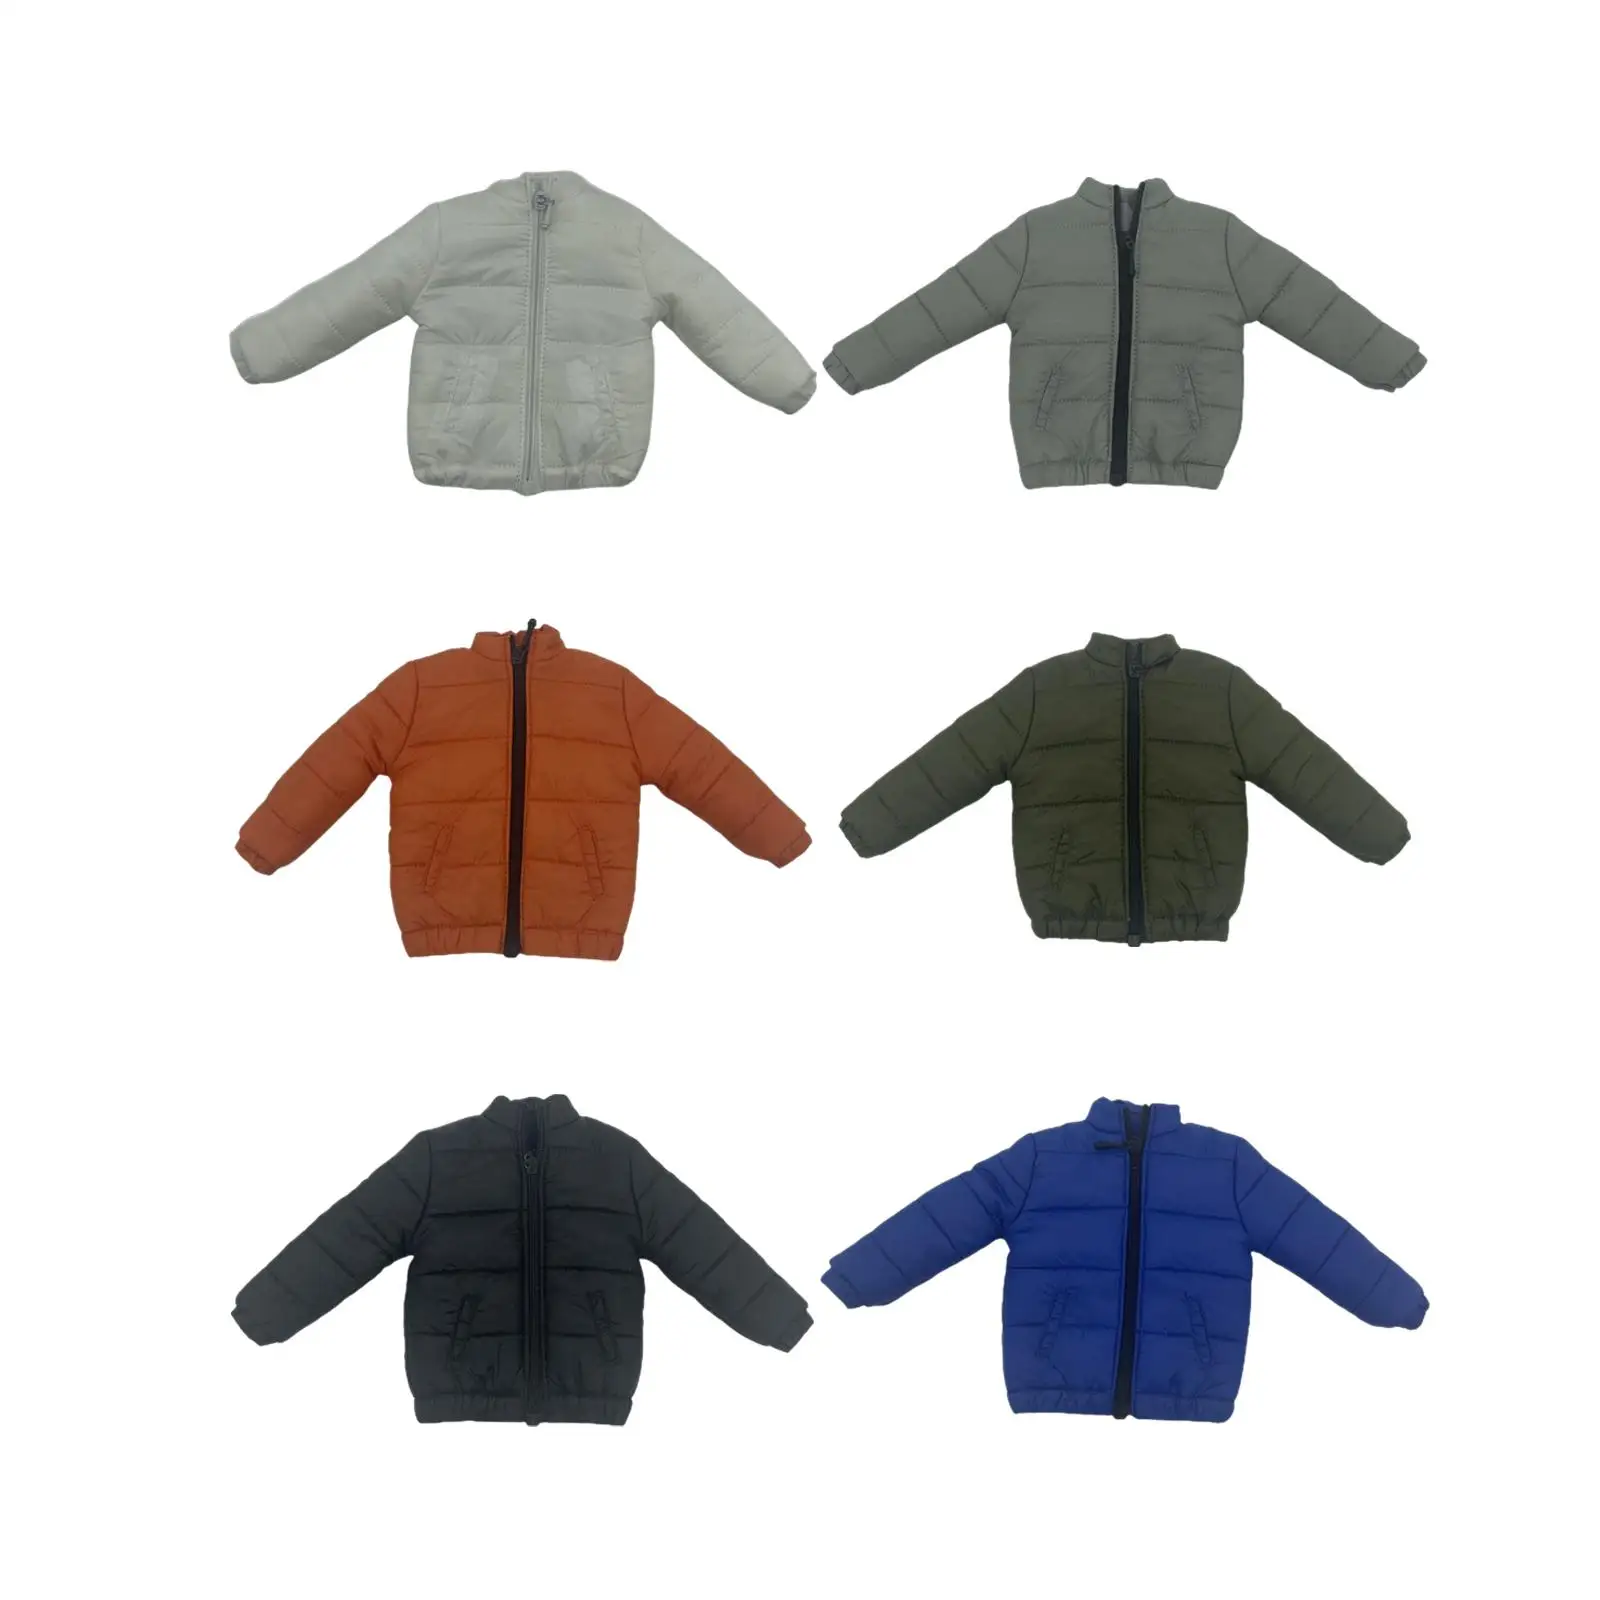 1/6 Doll Down Jacket Daily Wear Clothing Dress Up Clothing for 12 in Male Action Figures